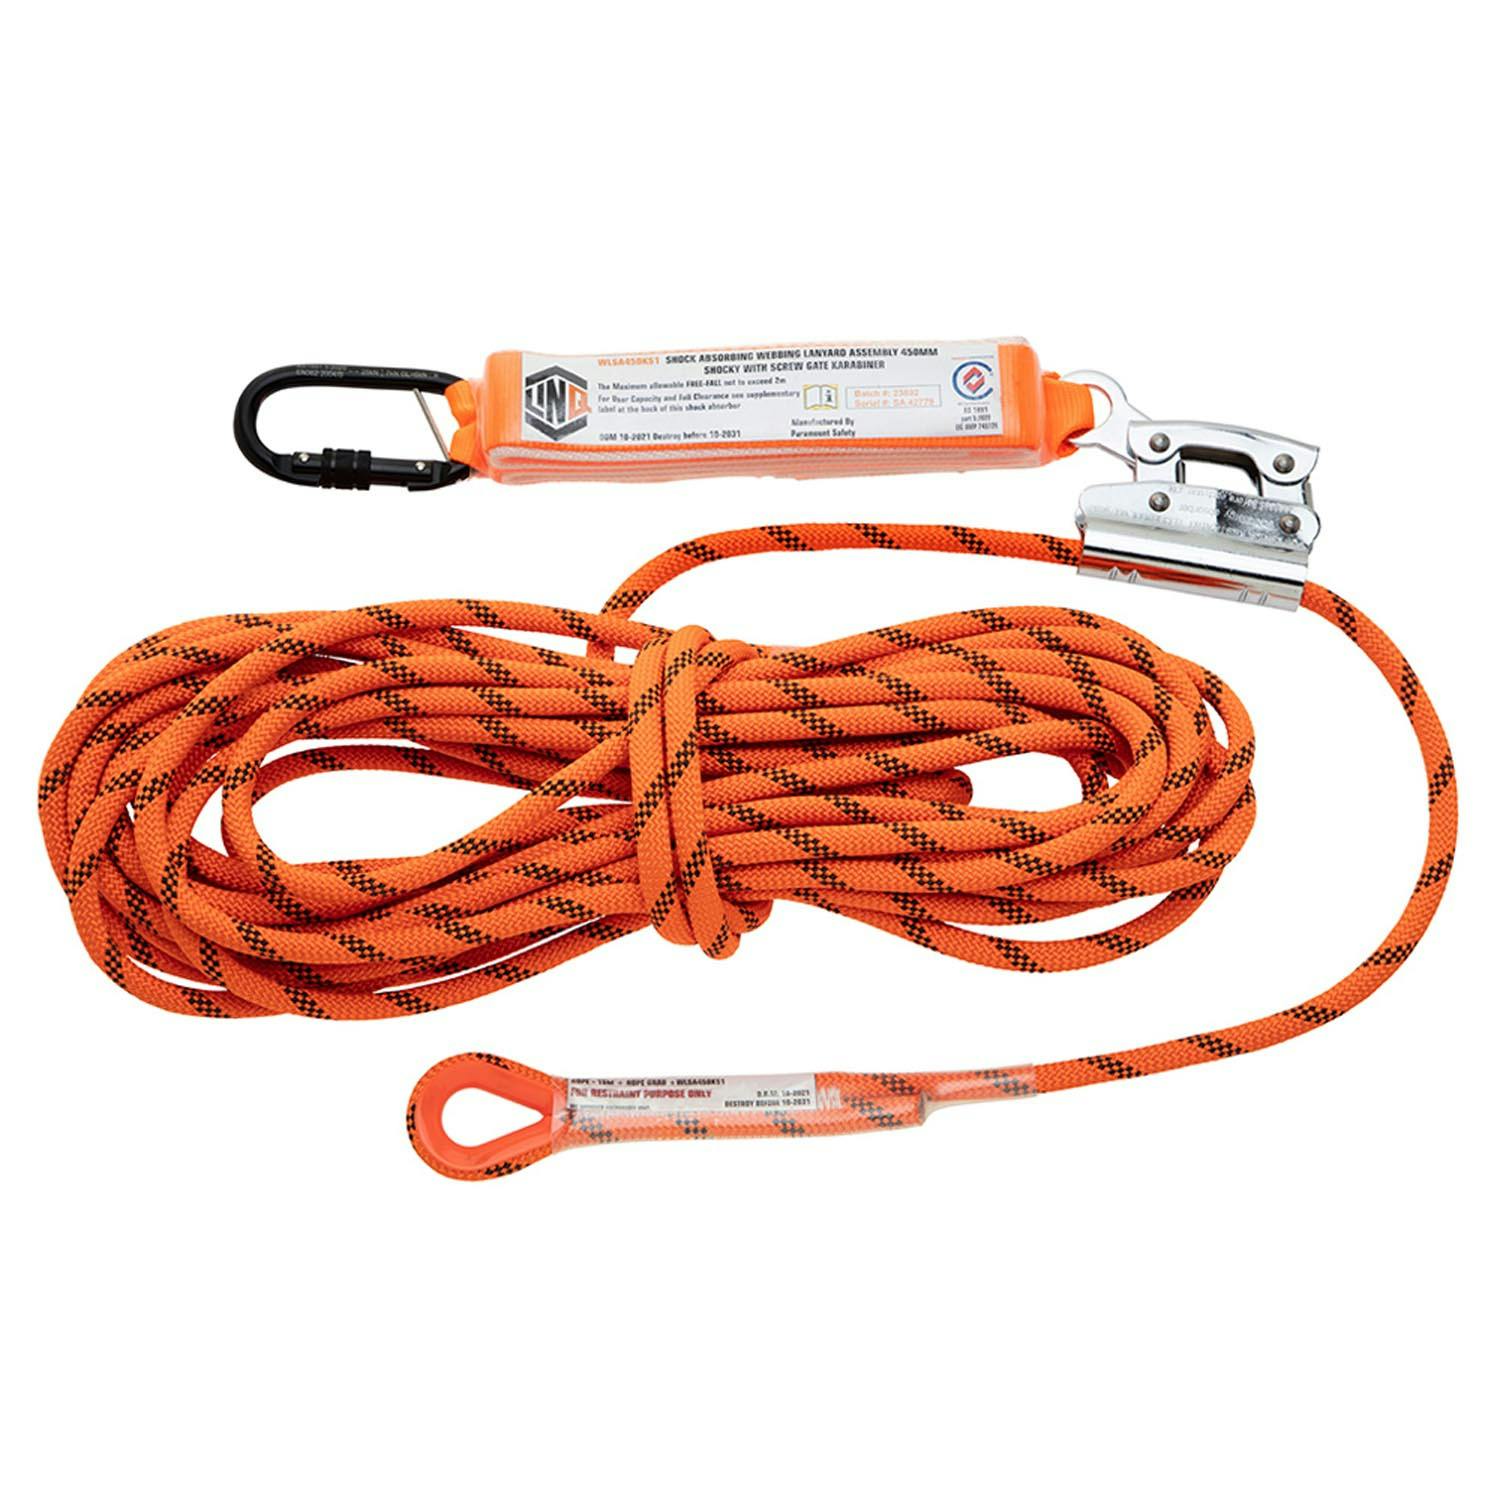 LINQ Rope Kernmantle 15M C/W Rope Grab & Perm Attach Shocky With Screwgate  Kara